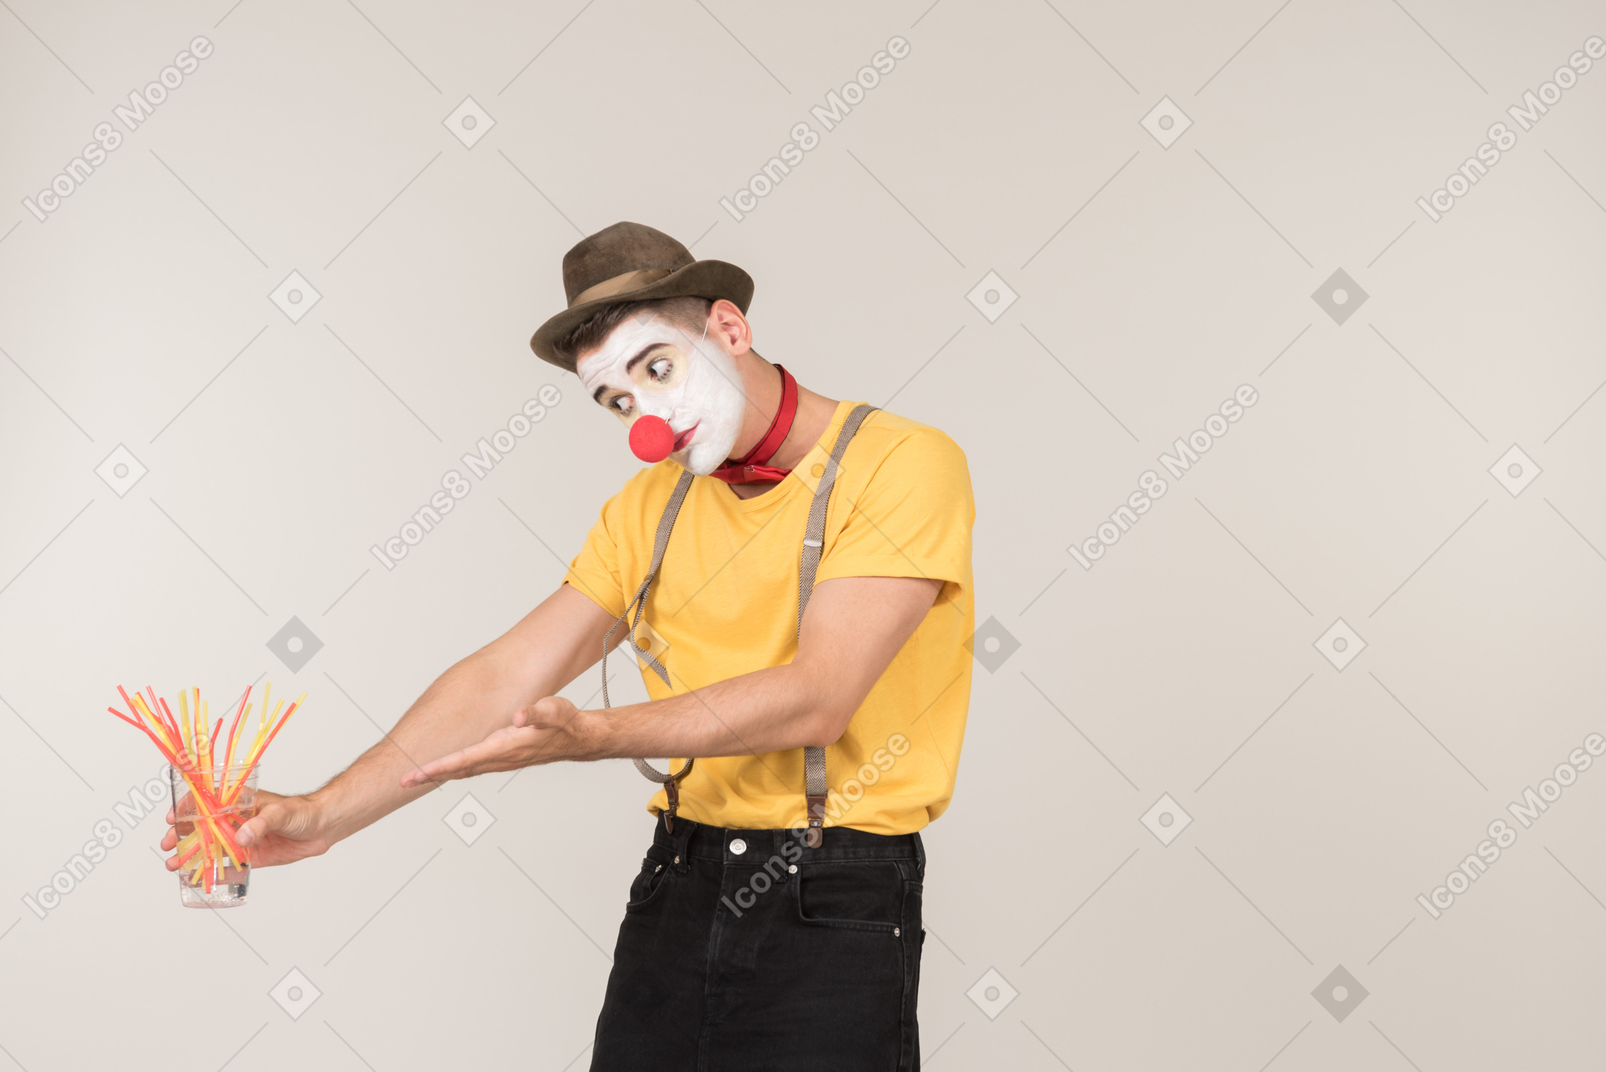 Sad male clown pointing at glass of plastic straws he's holding